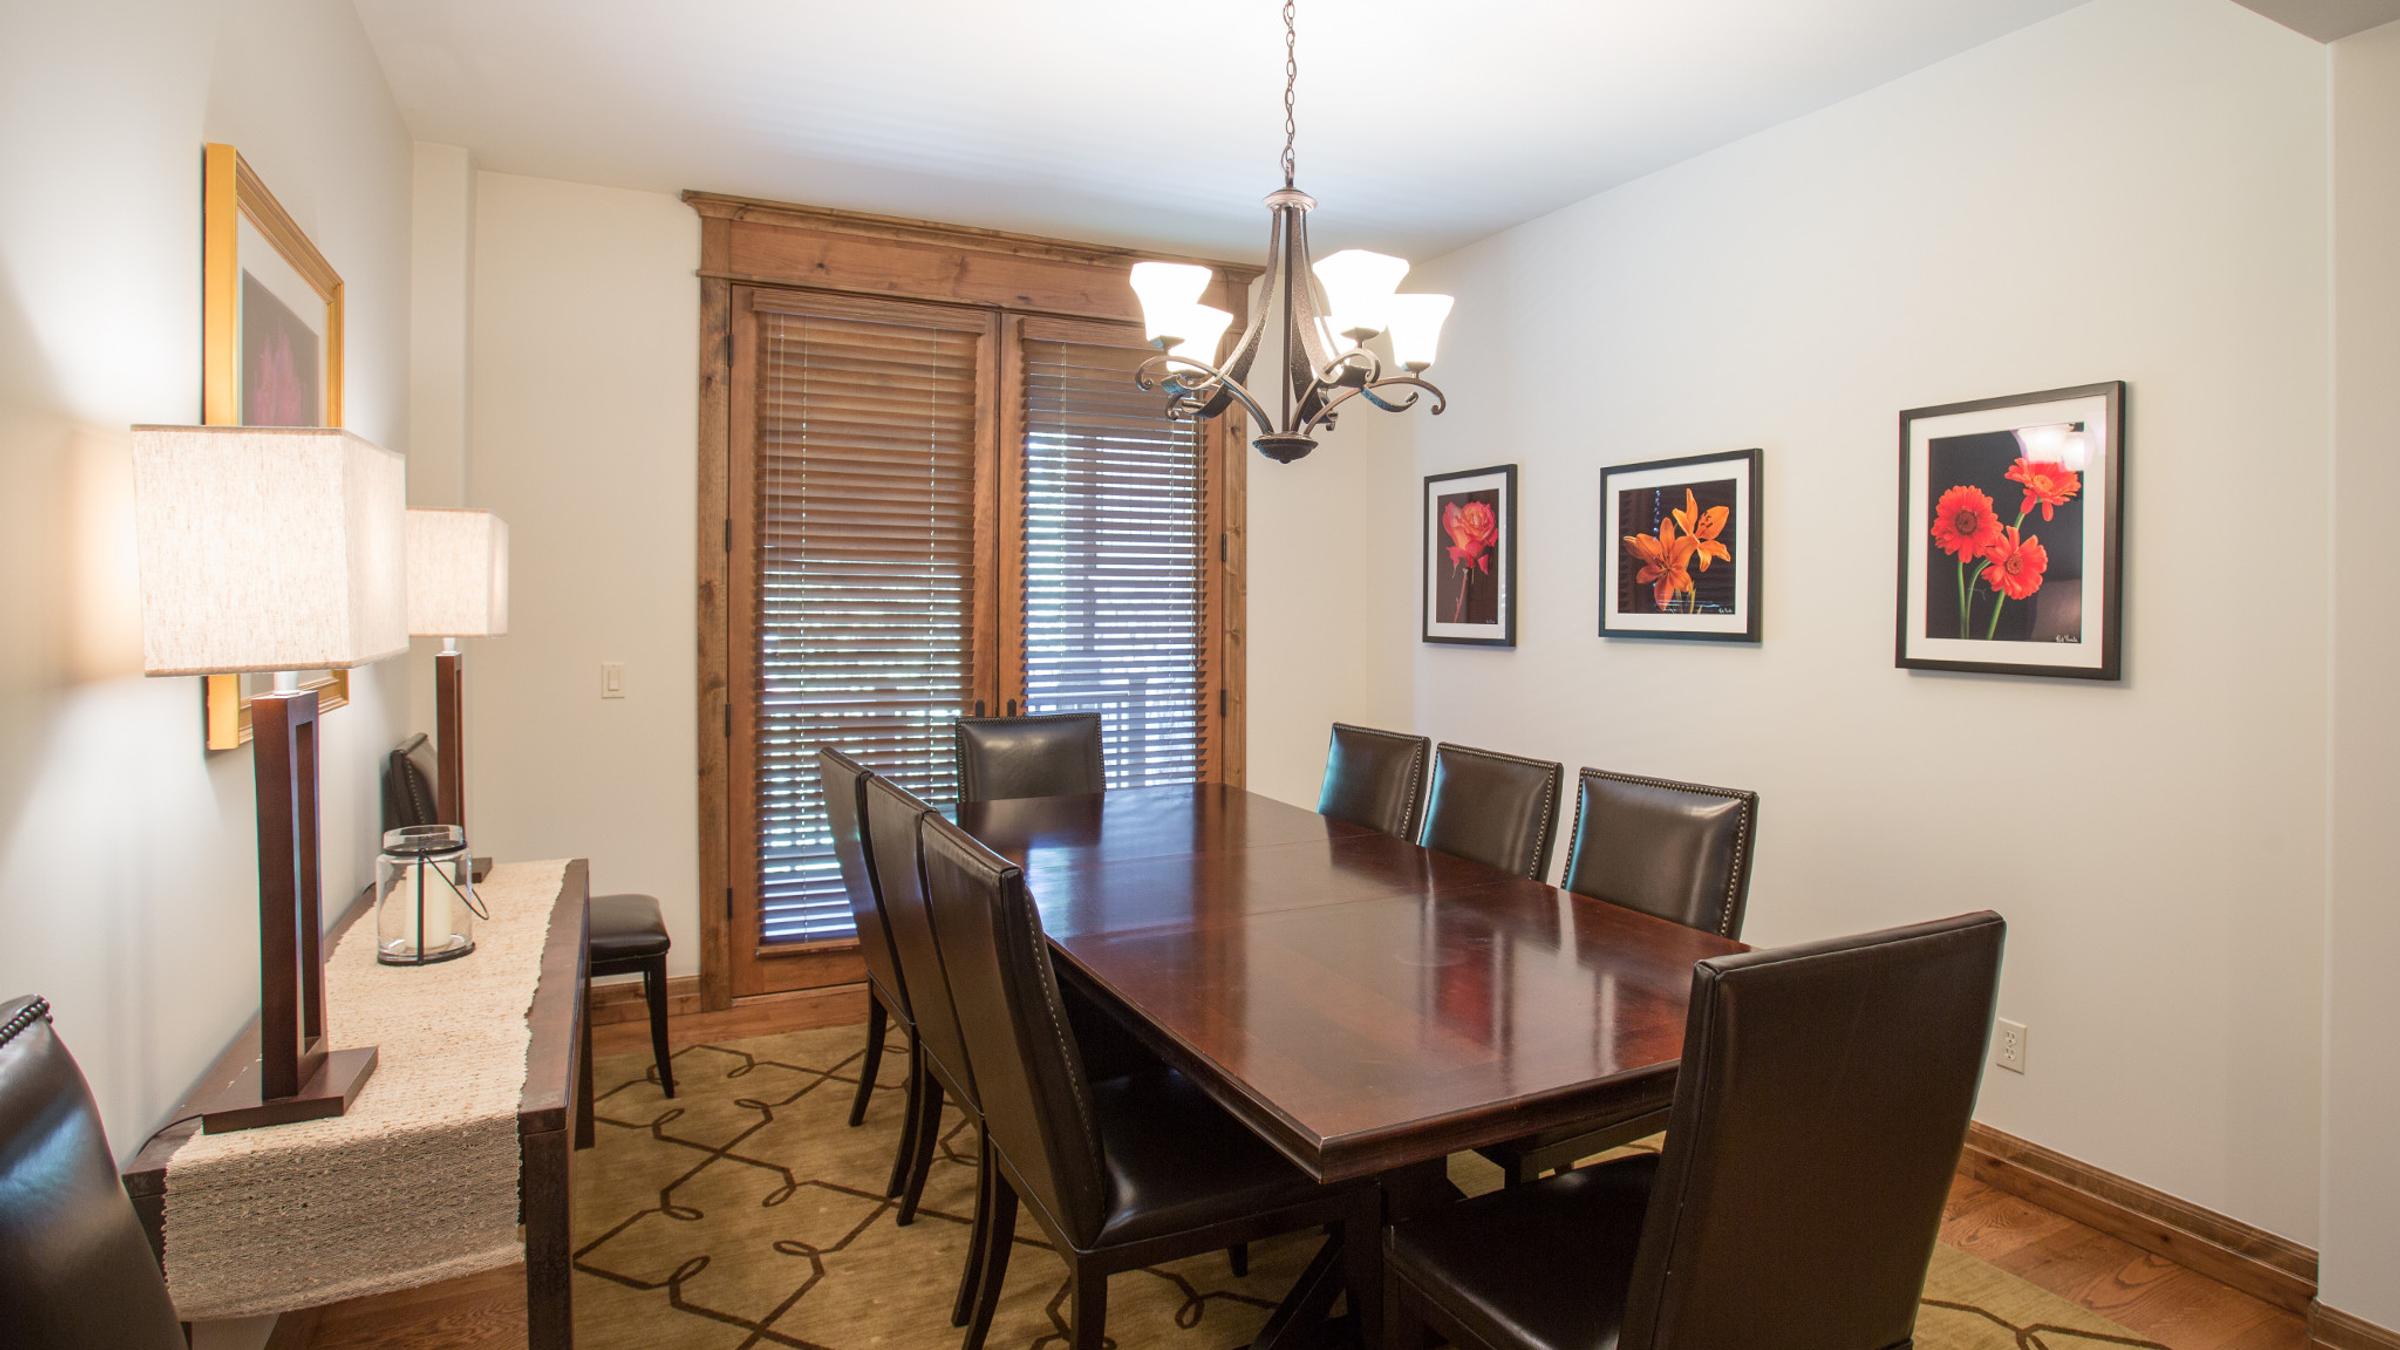 Dining room table with chairs and side table